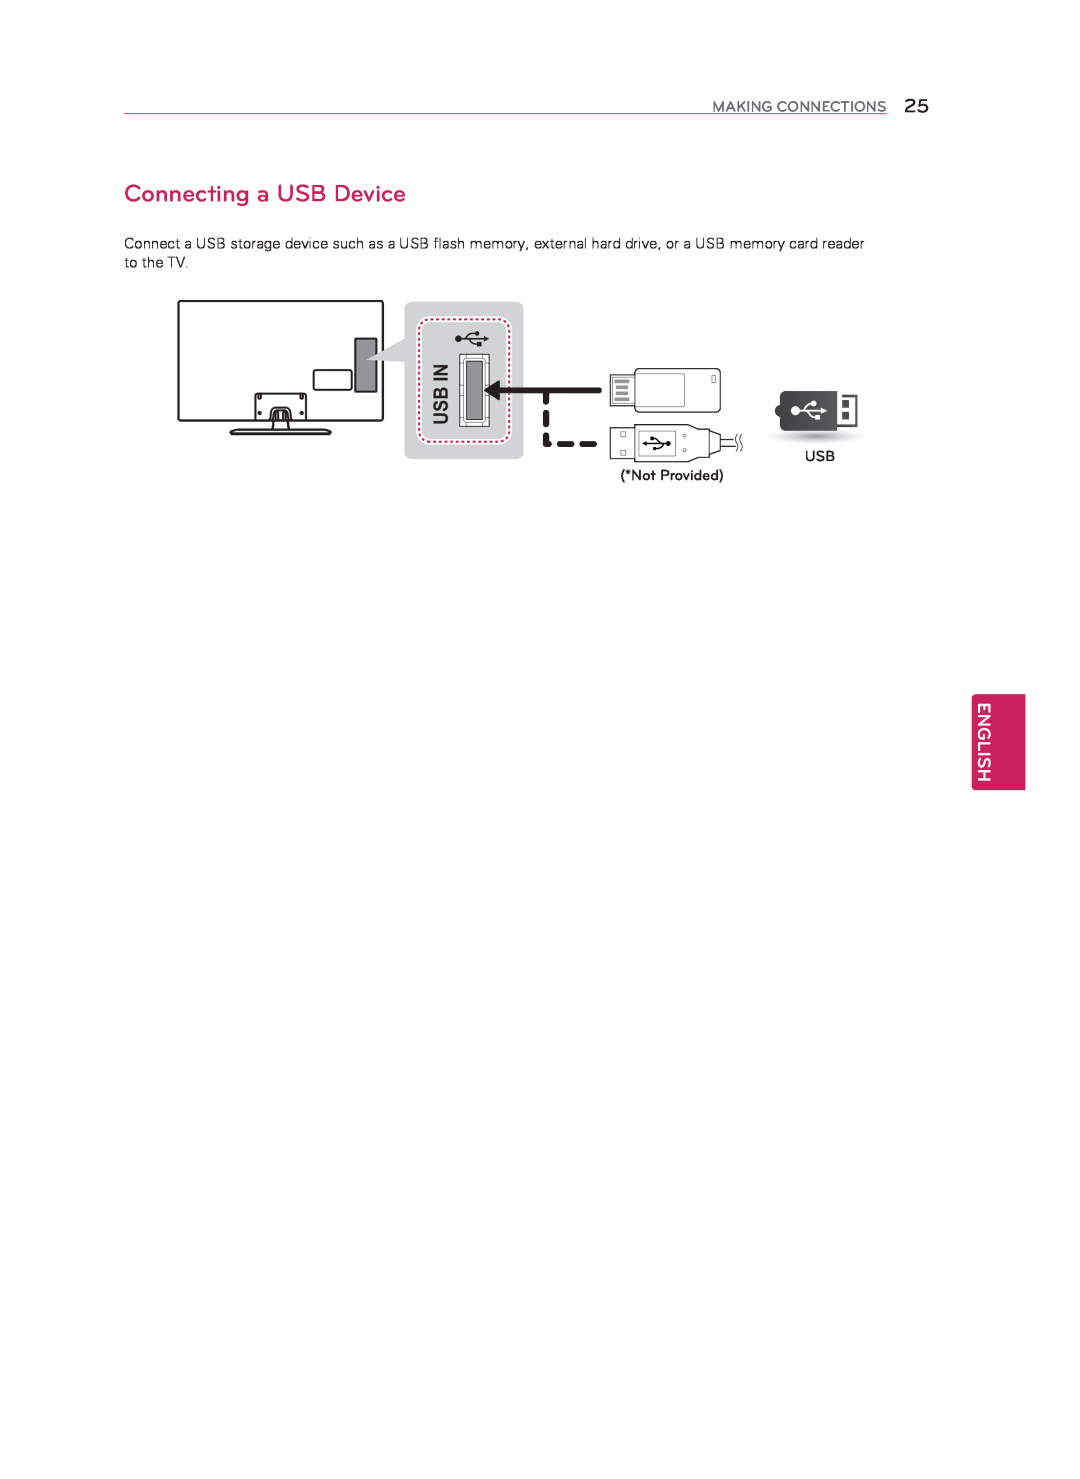 LG Electronics 60LN5400 owner manual Connecting a USB Device, Usb In, English, Making Connections 